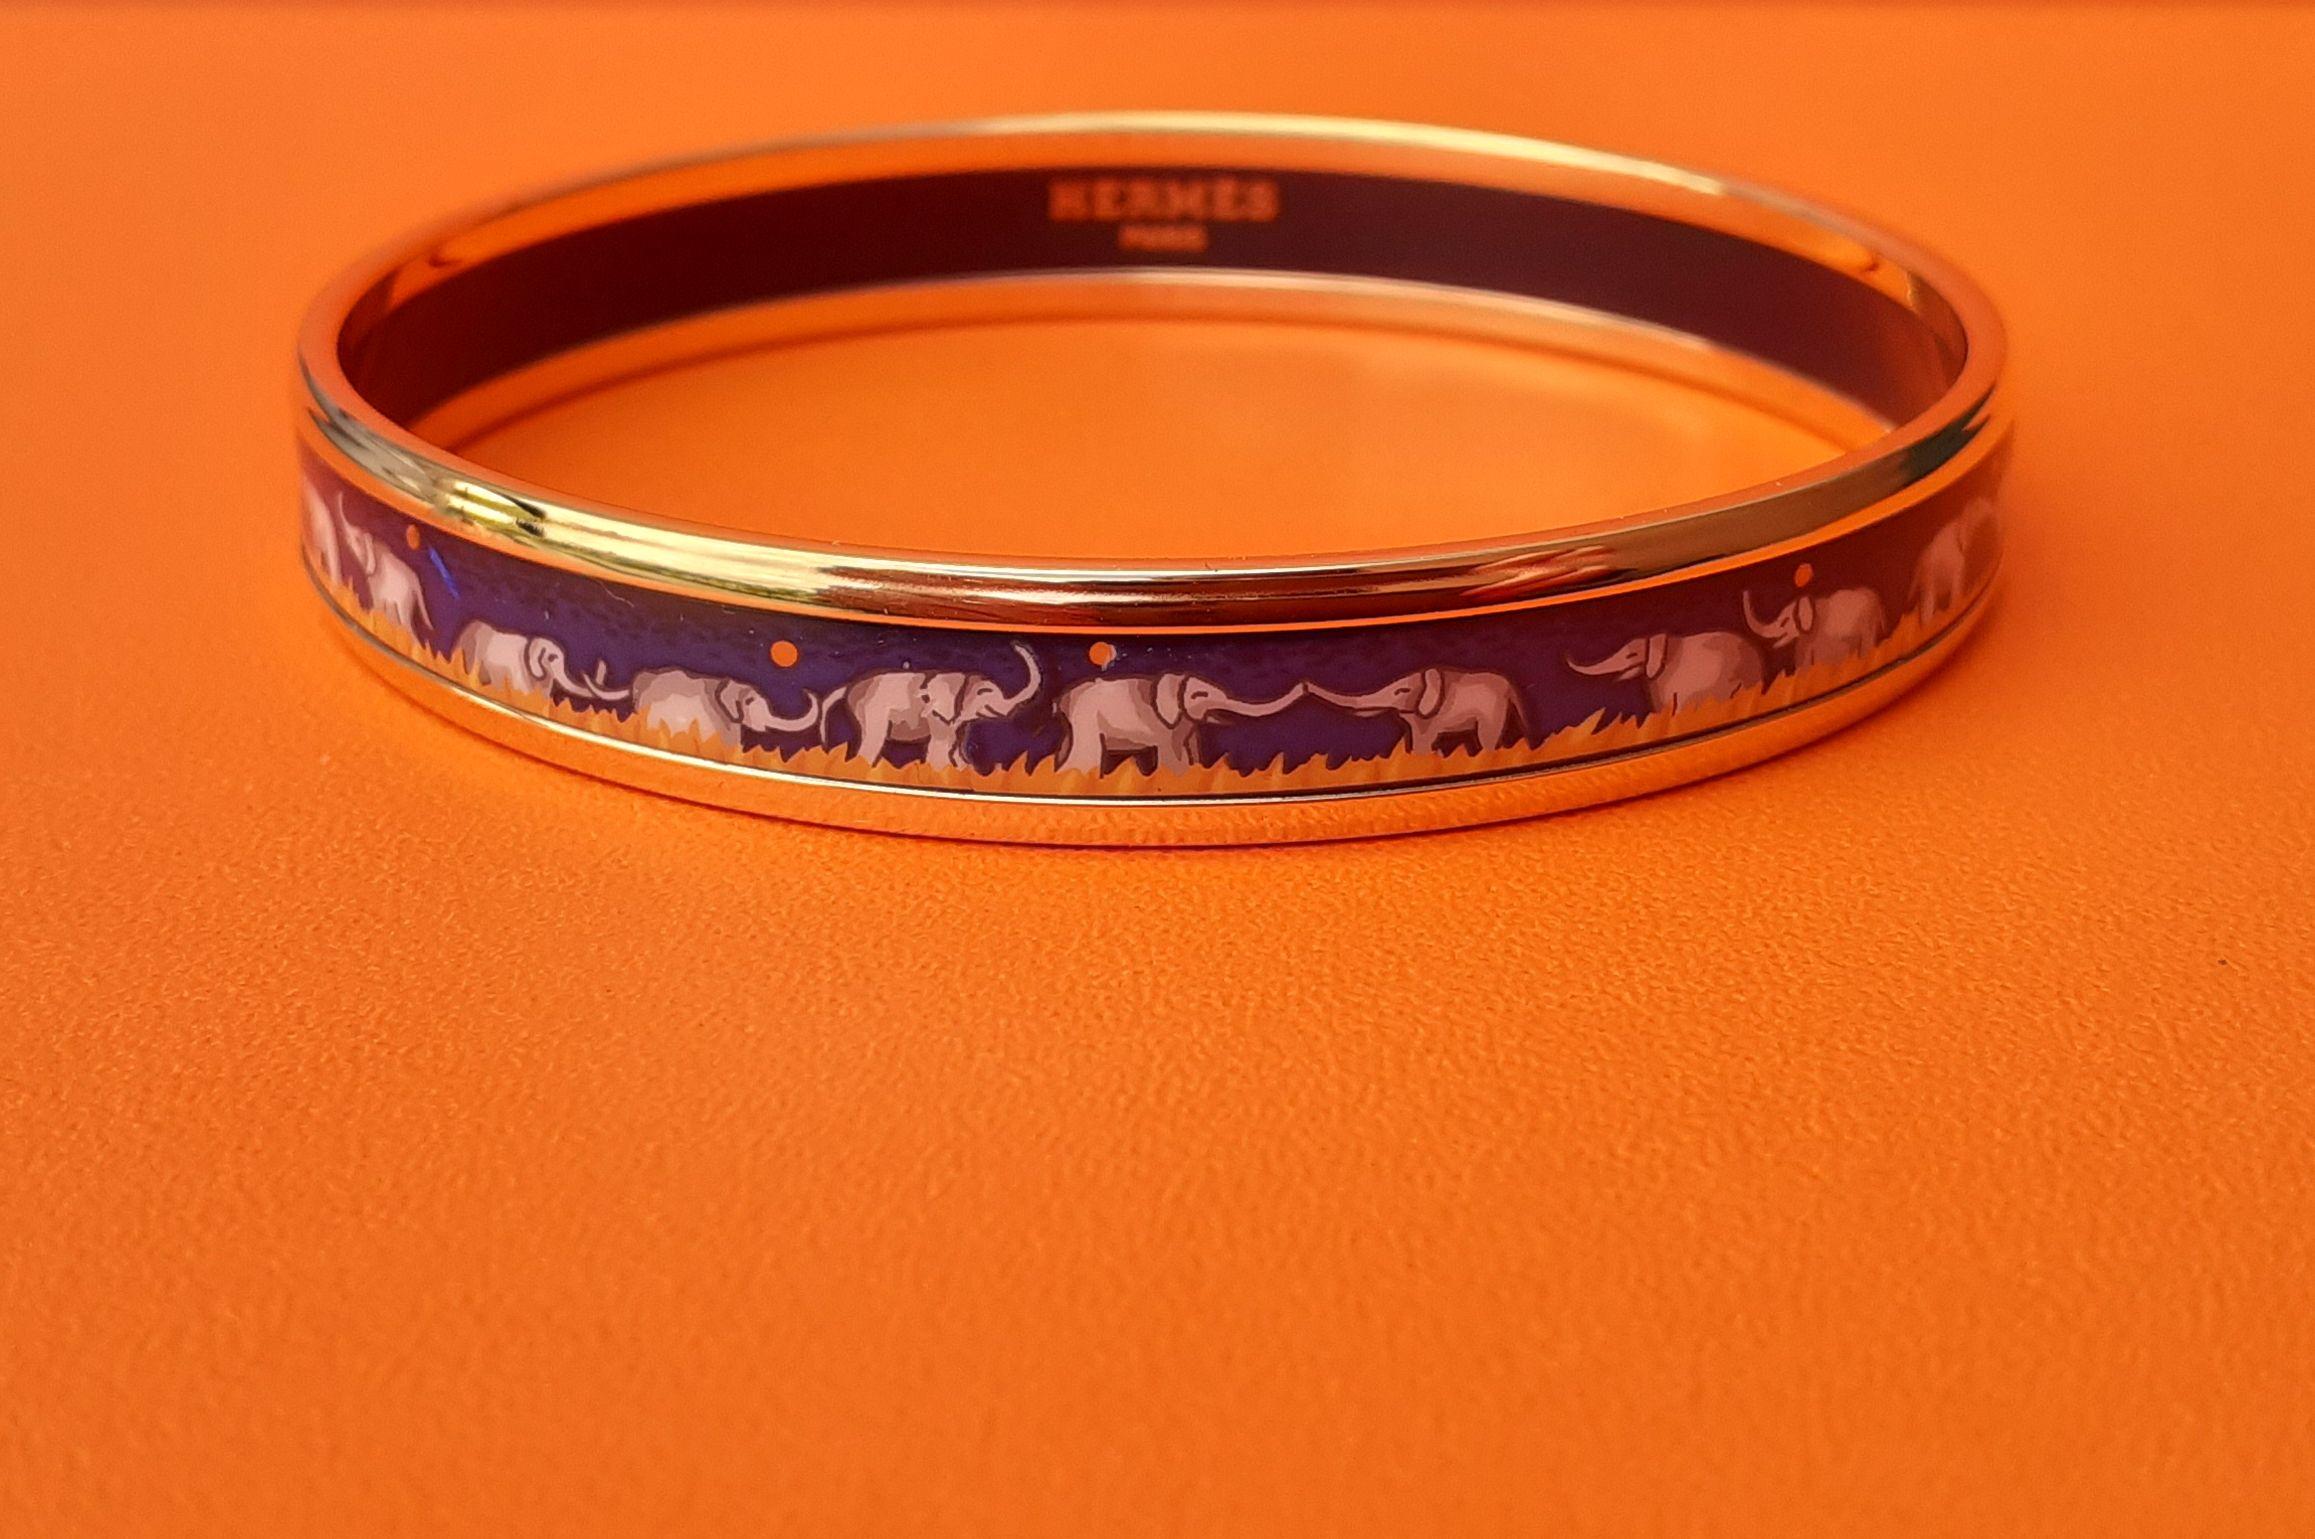 Gorgeous Authentic Hermès Bracelet

Pattern: Elephants Grazing

Hard to find ! One of the most thought after Hermès Bracelet

Made in Austria + H

Made of printed Enamel and NEW Yellow Gold Plated Hardware

Colorways: Navy Blue Background and orange